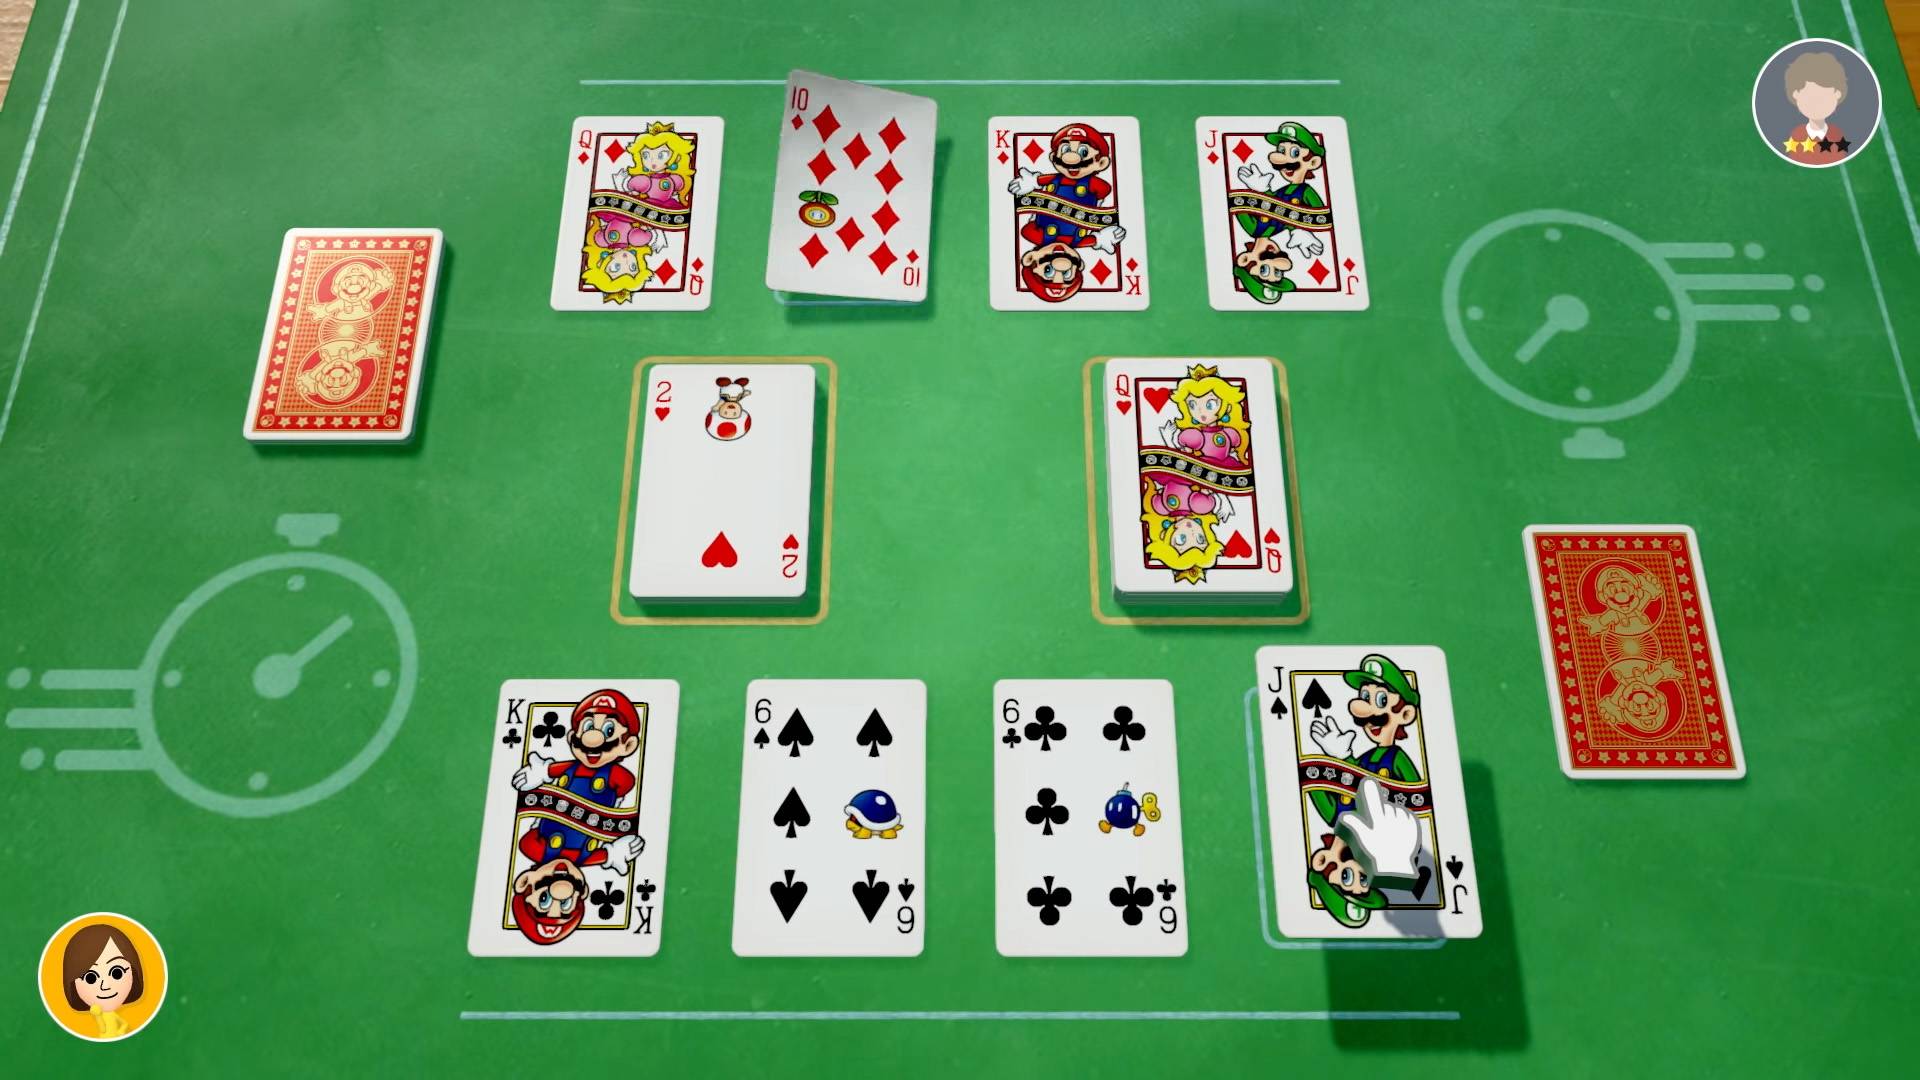 A game of cards is being played, with Mario characters visible on the cards themselves 